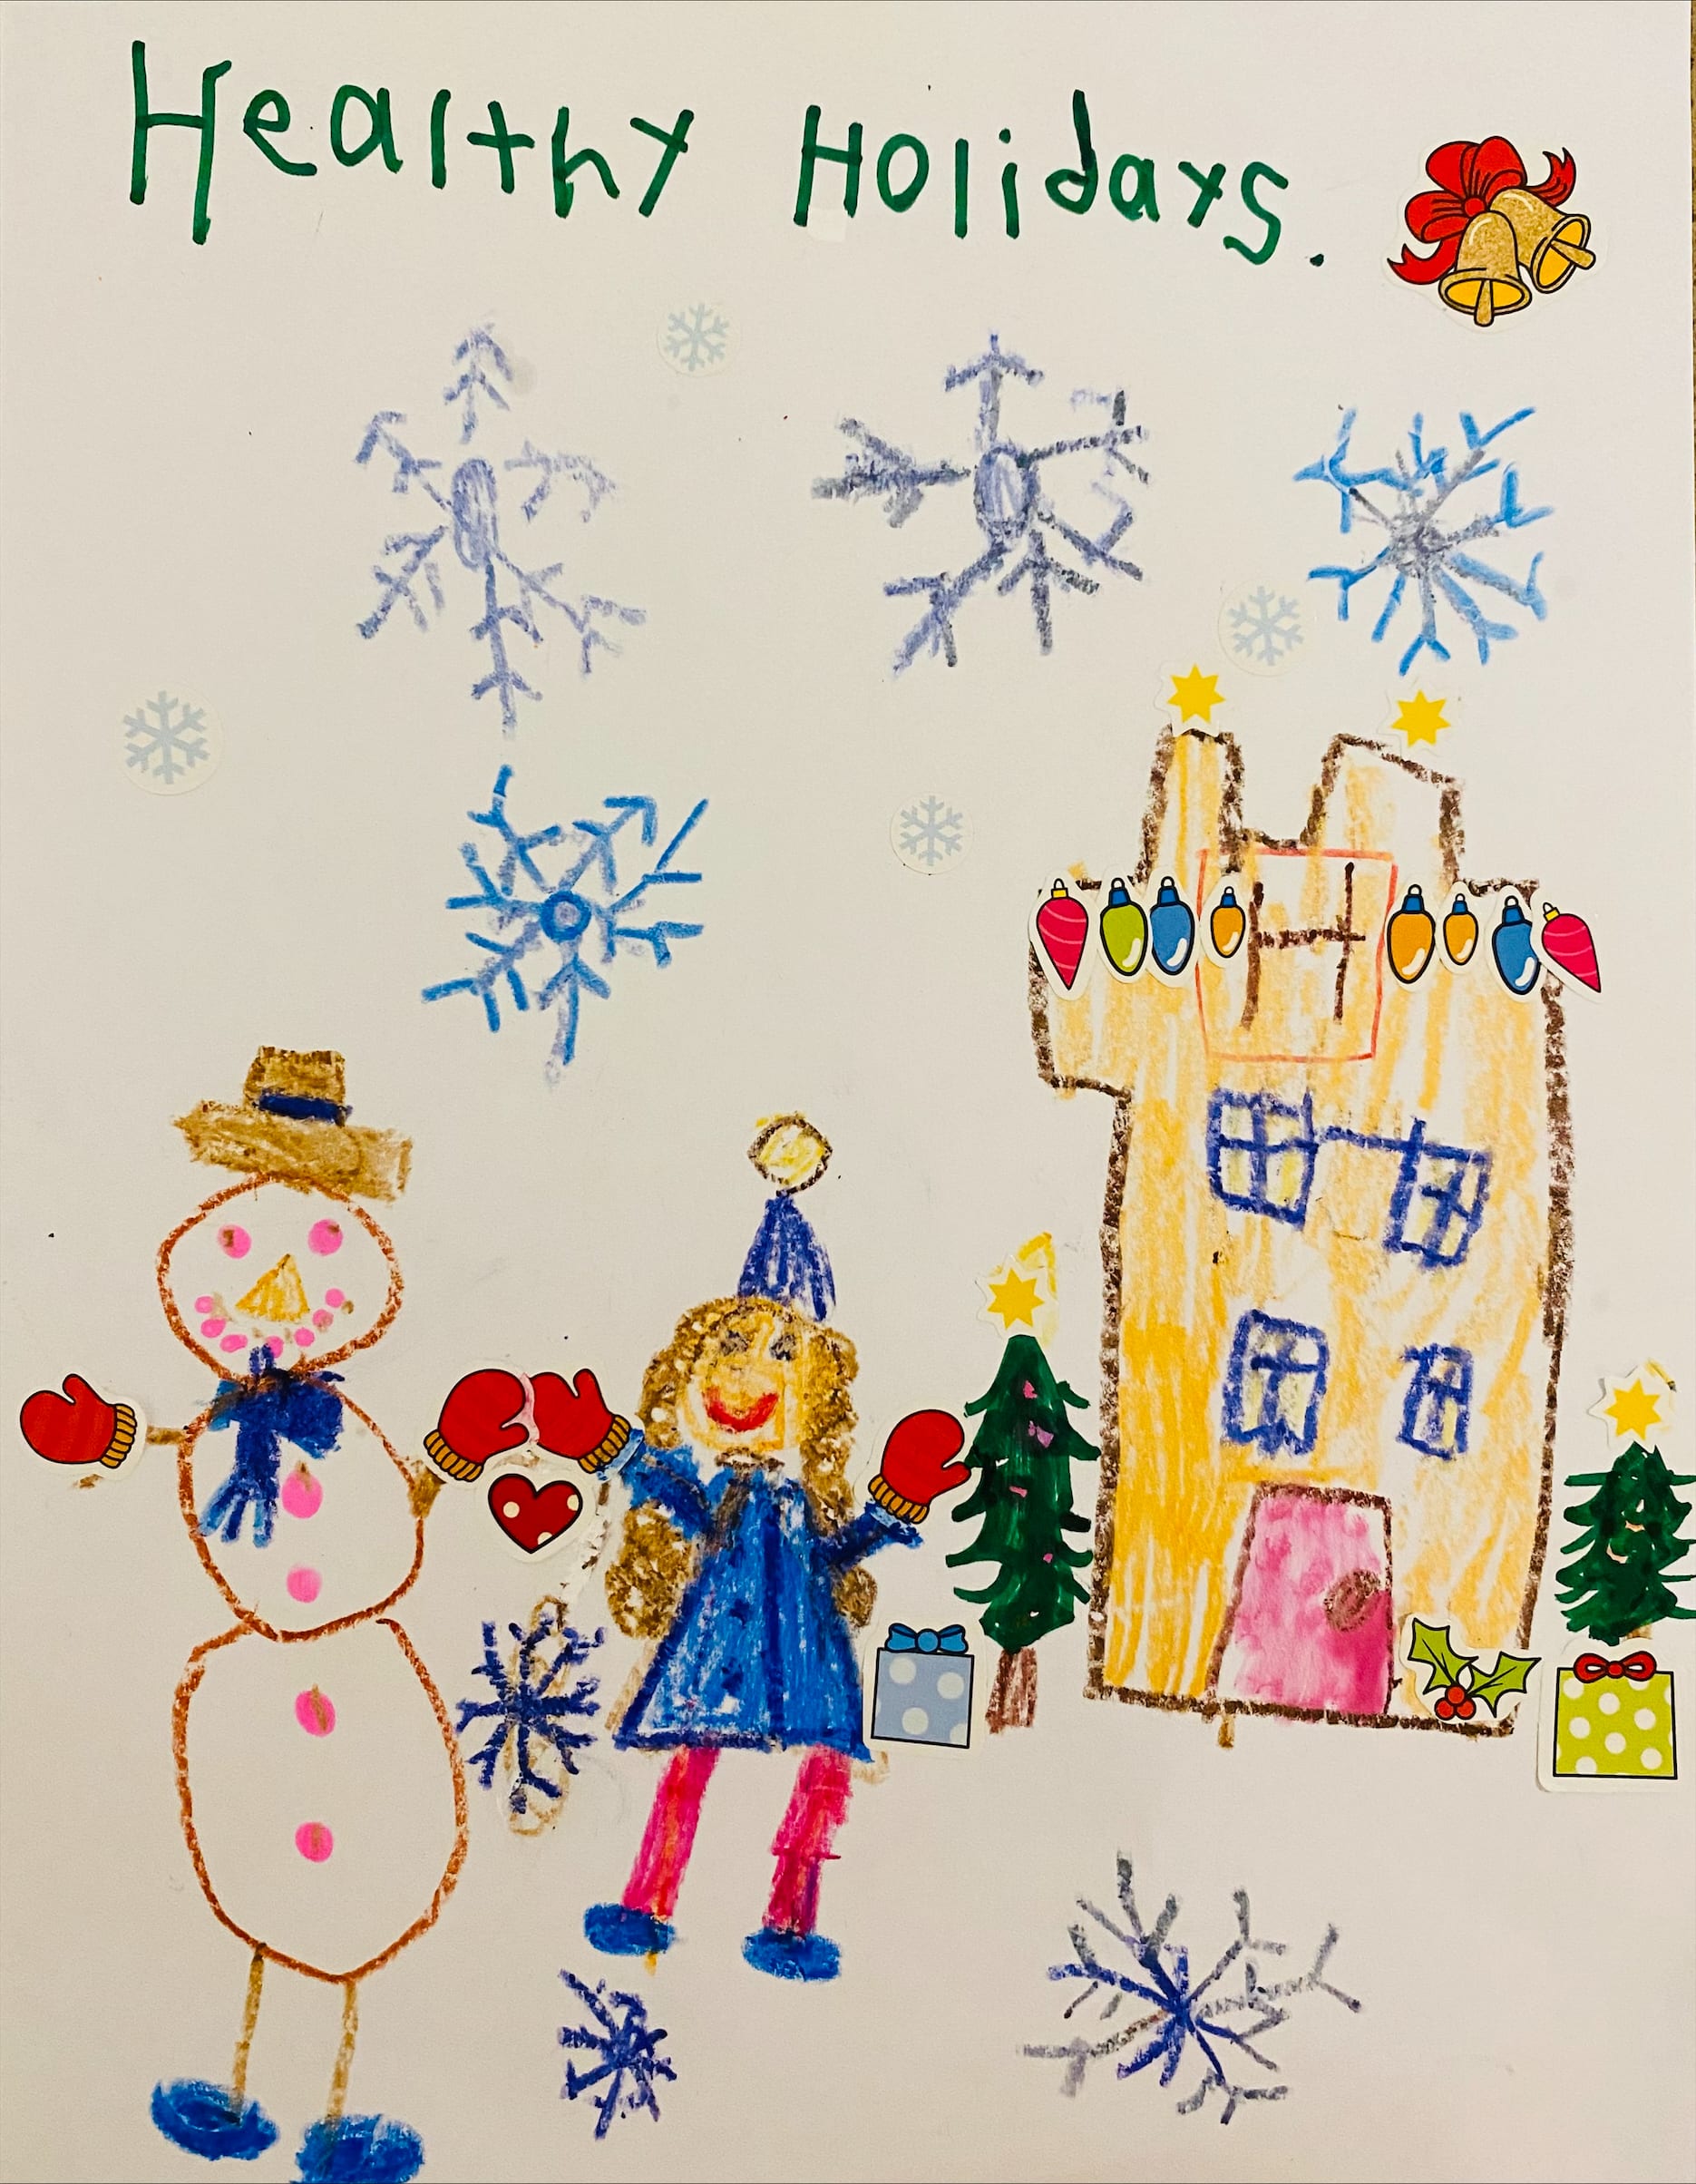 Kinsley Miller's winning card submission. A snowman and child hold hands outside a hospital and wish Healthy Holidays